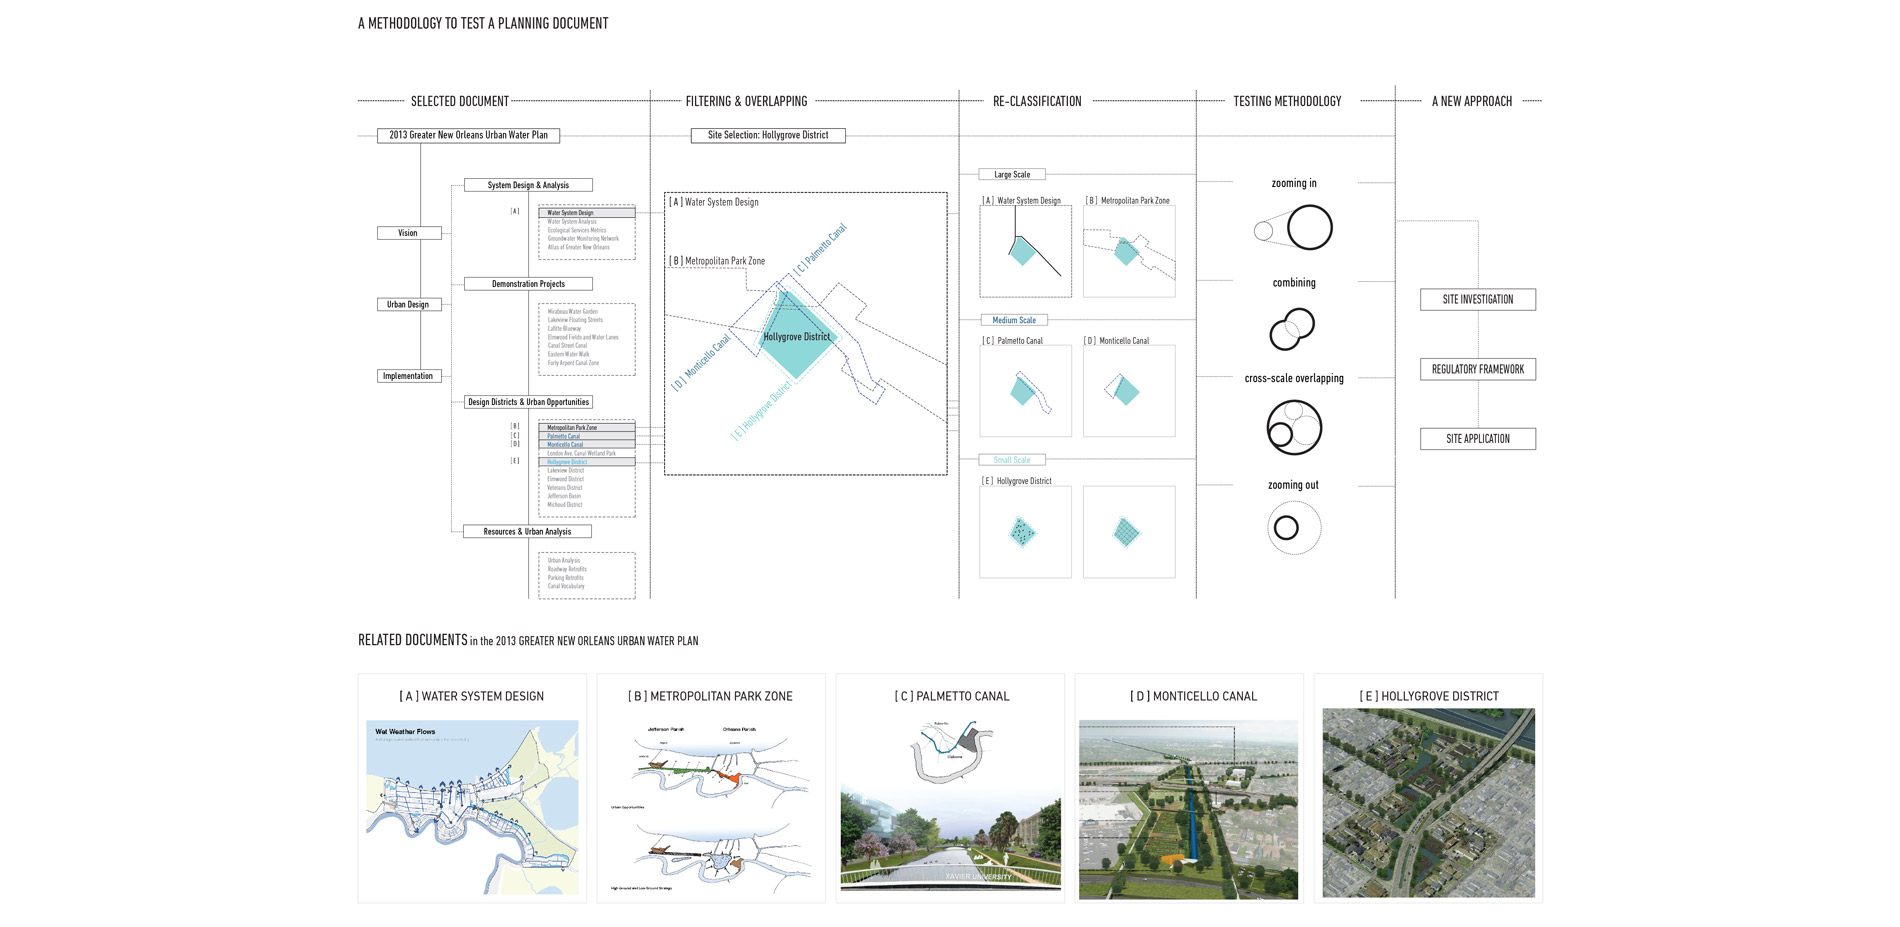 This project initiates from questioning the limitations of planning at the scale of a site. Based on a close reading of a masterplan document, it prop…